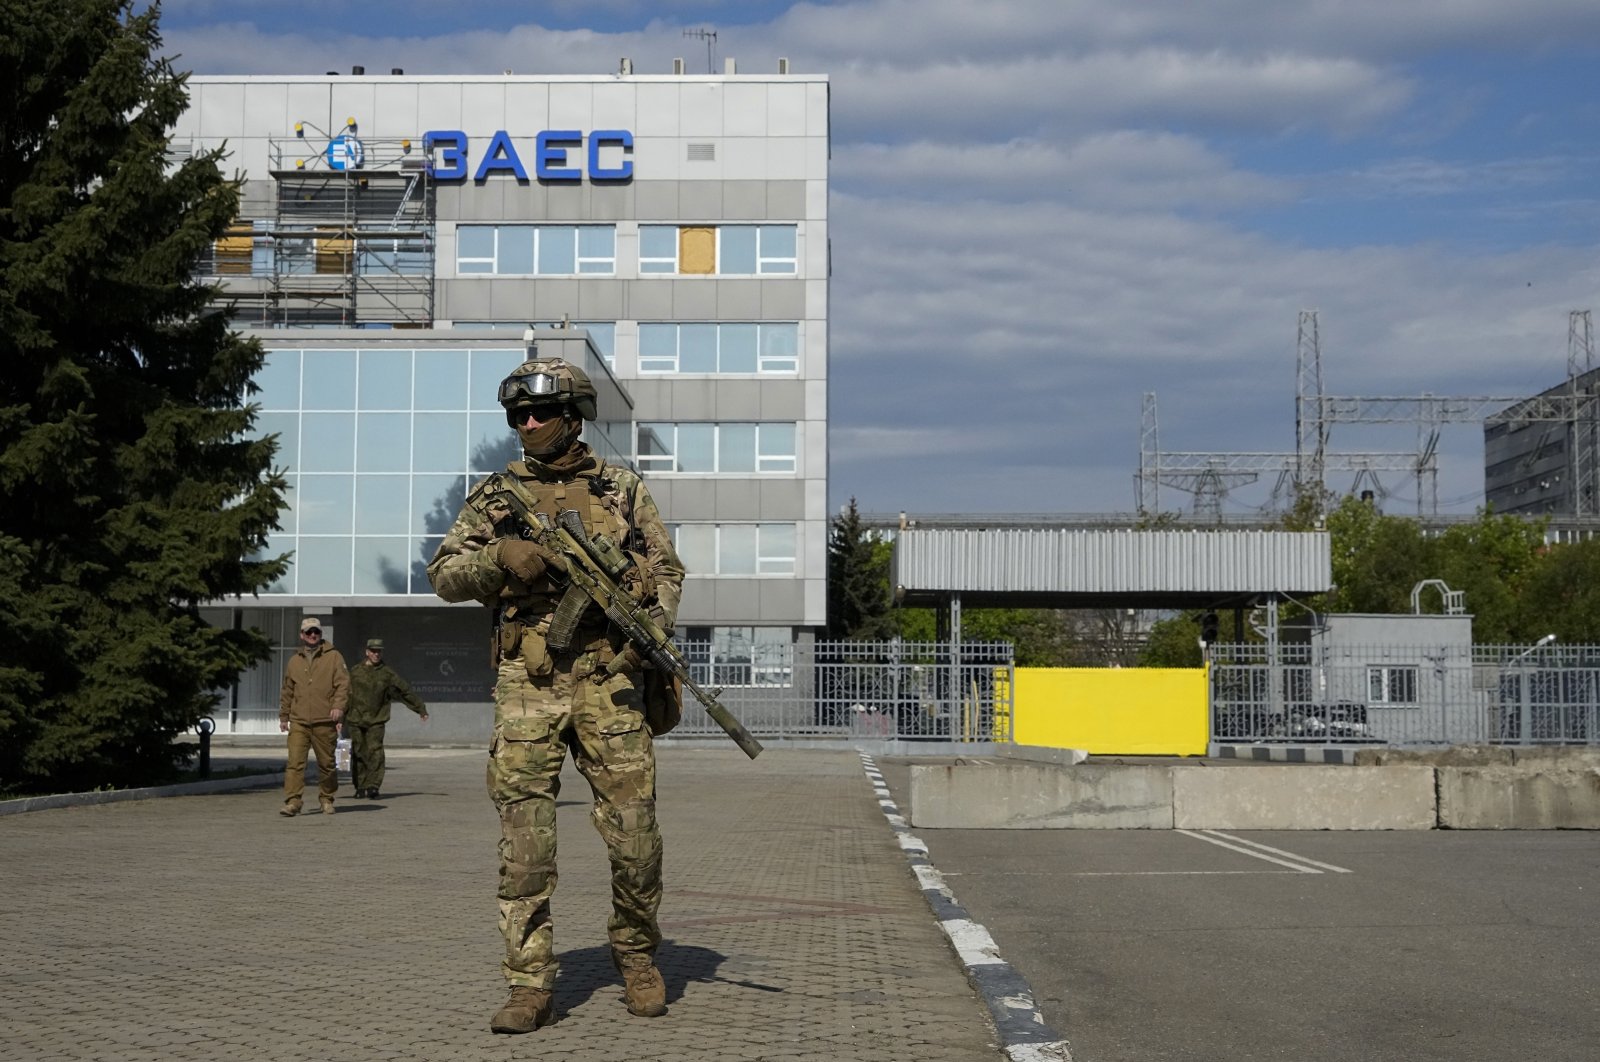 A Russian soldier stands guard in an area of the Zaporizhzhia Nuclear Power Station, southeastern Ukraine, May 1, 2022. (AP Photo)